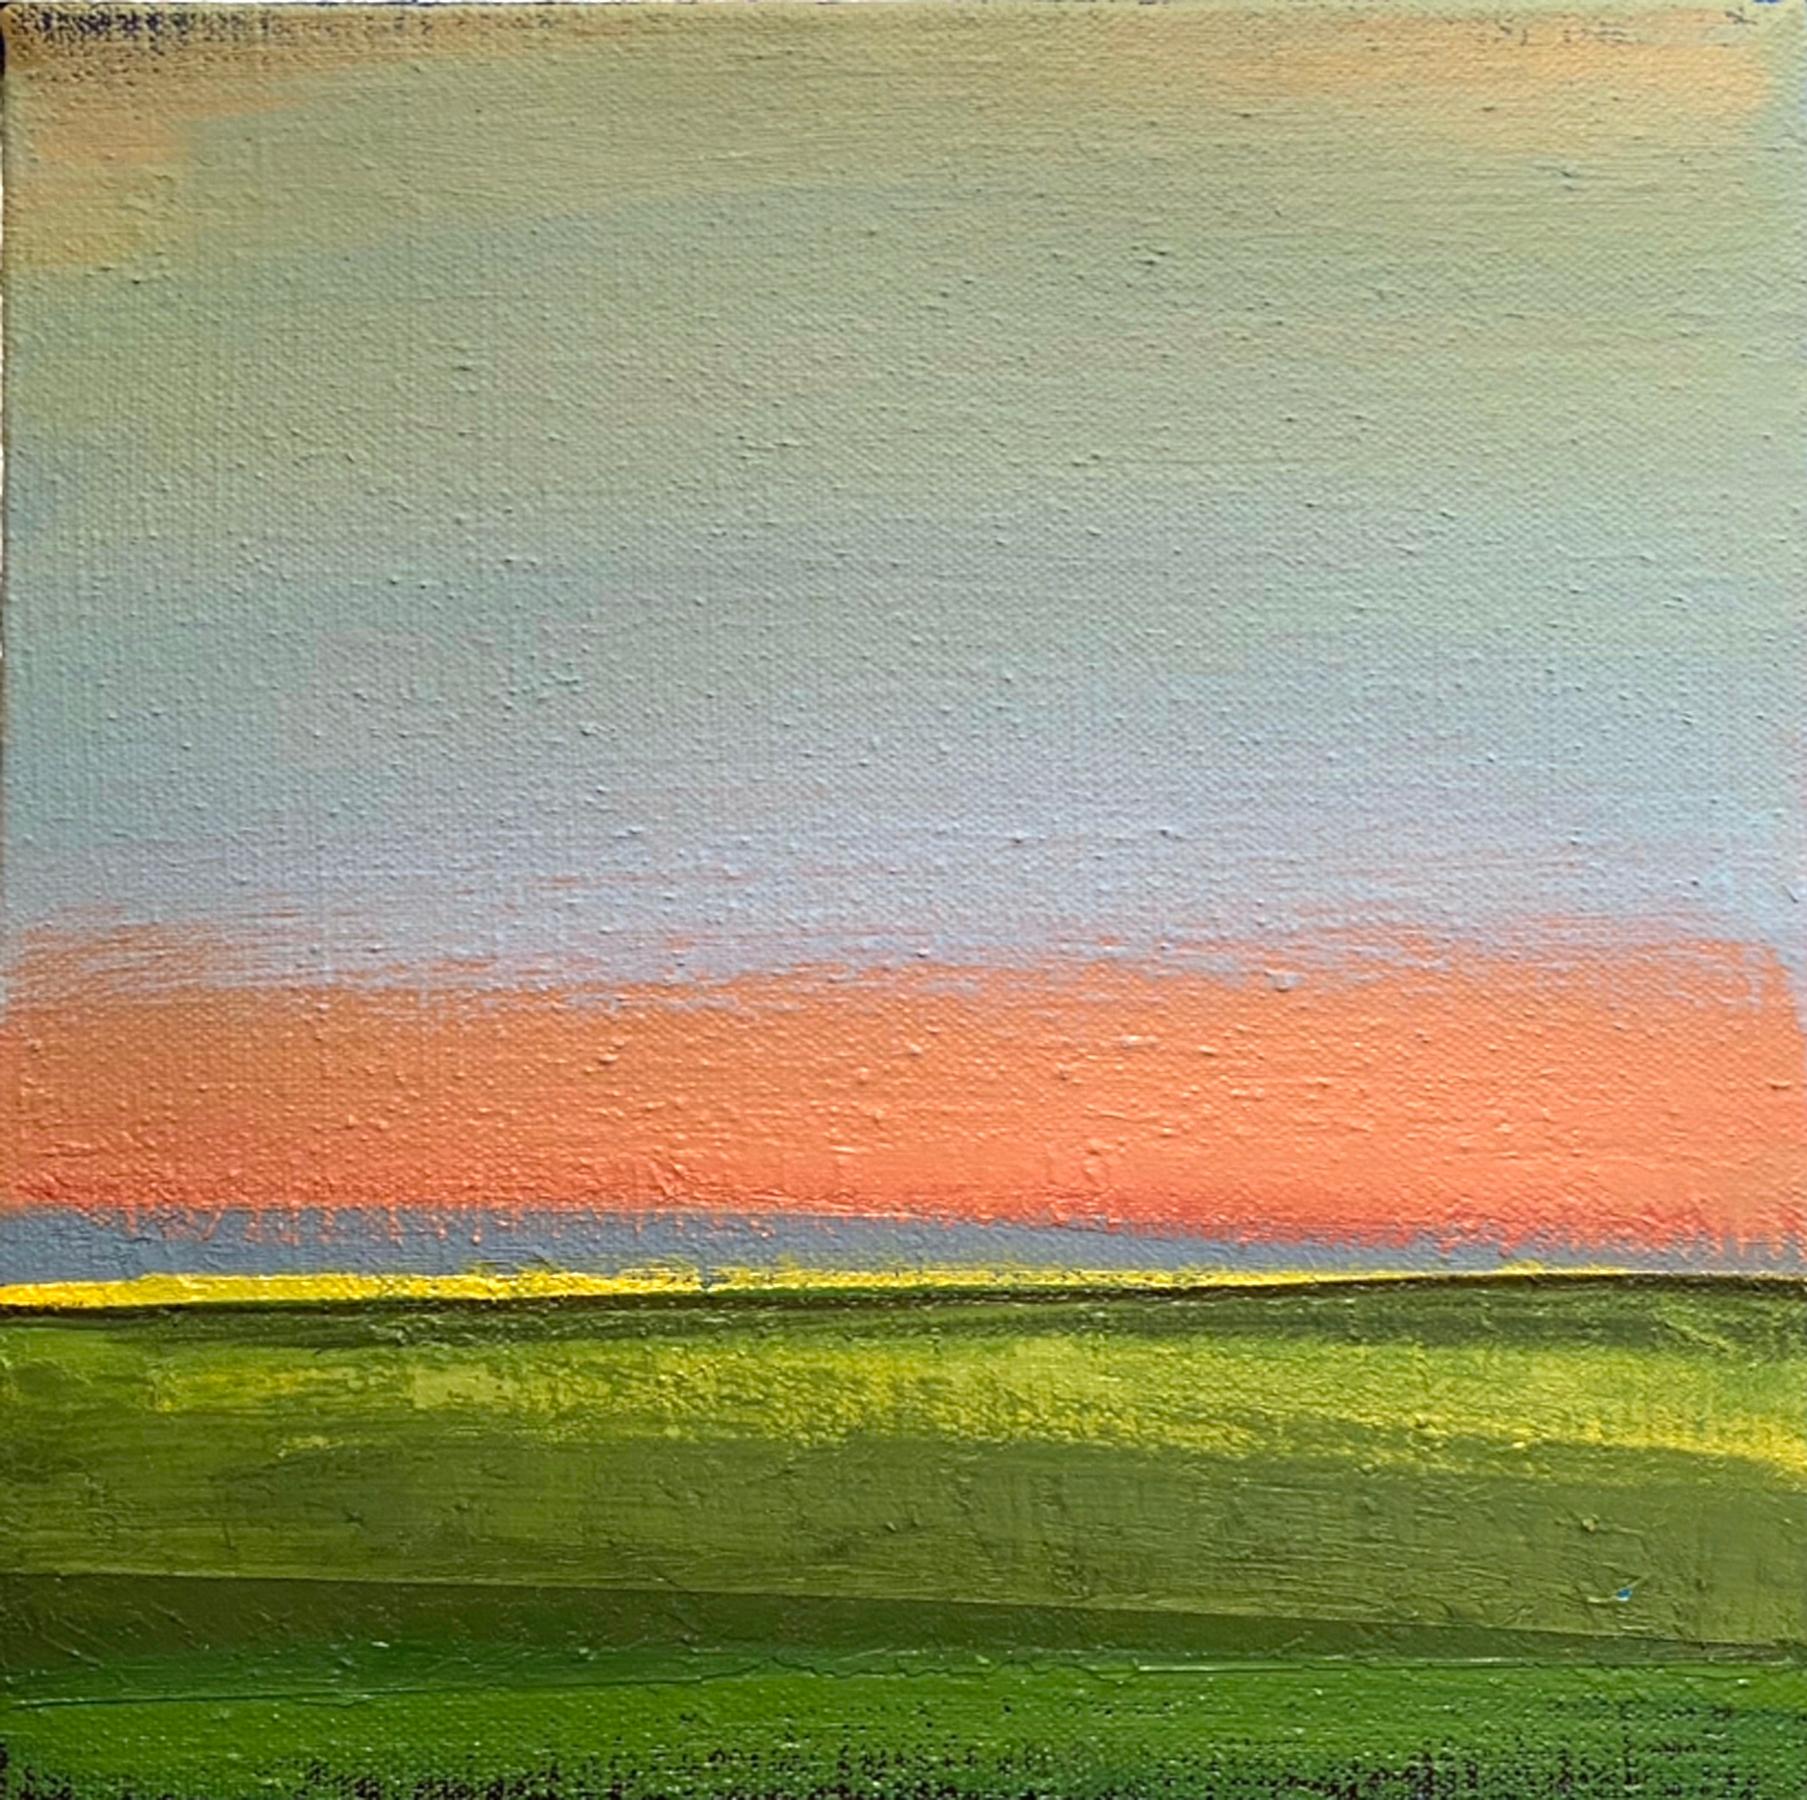 Alyson Kinkade Abstract Painting - Remembering Plains no. 53